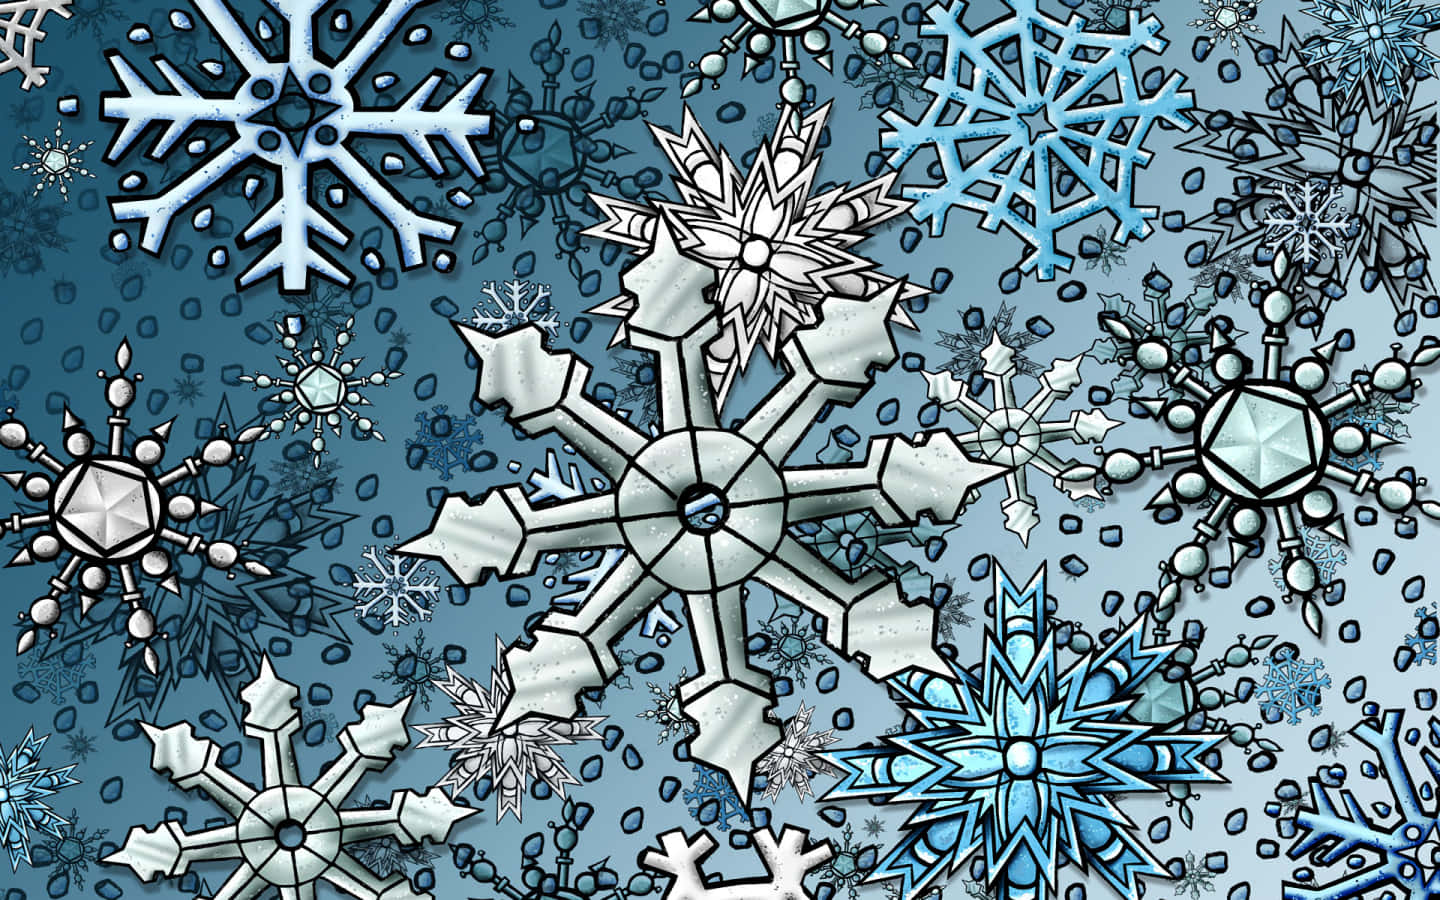 Crystal snowflake covered in icy blues and whites